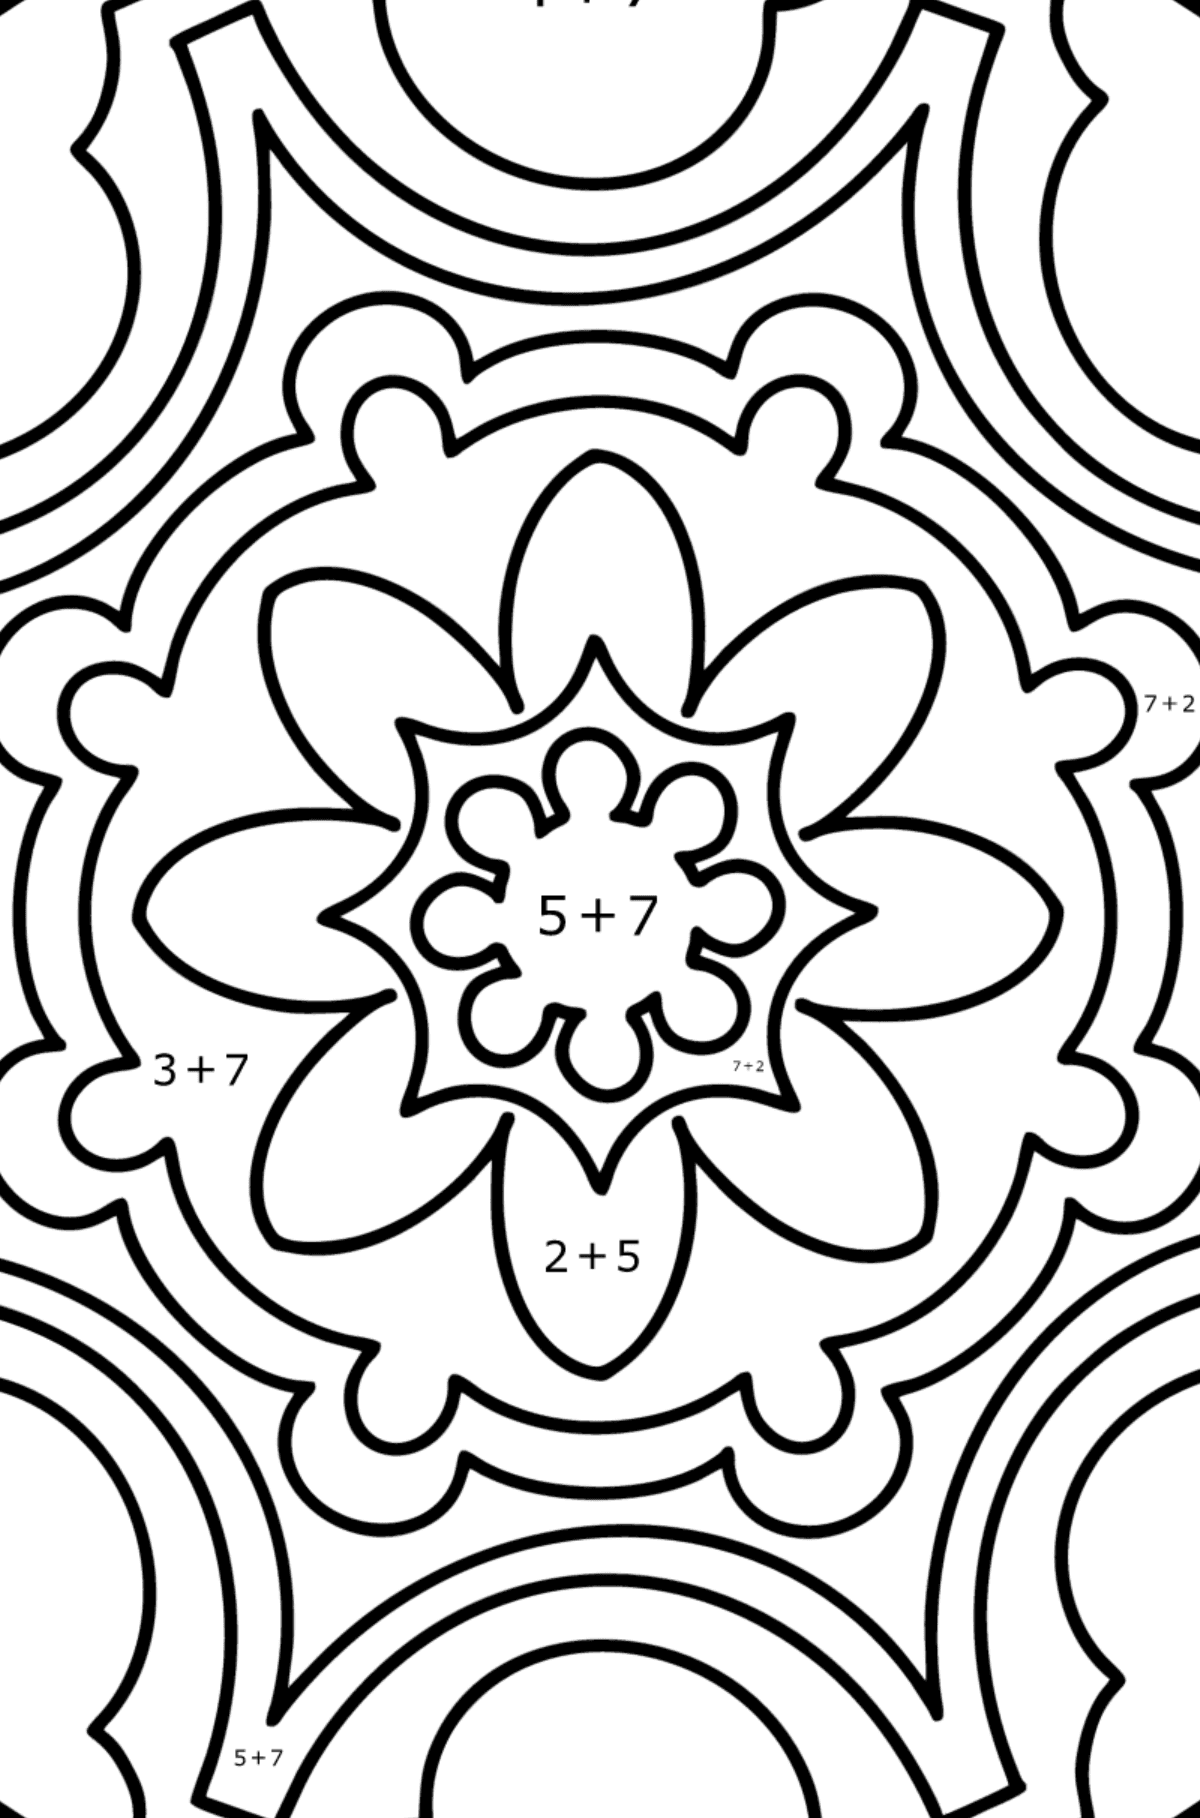 Mandala coloring page - 9 elements - Math Coloring - Addition for Kids